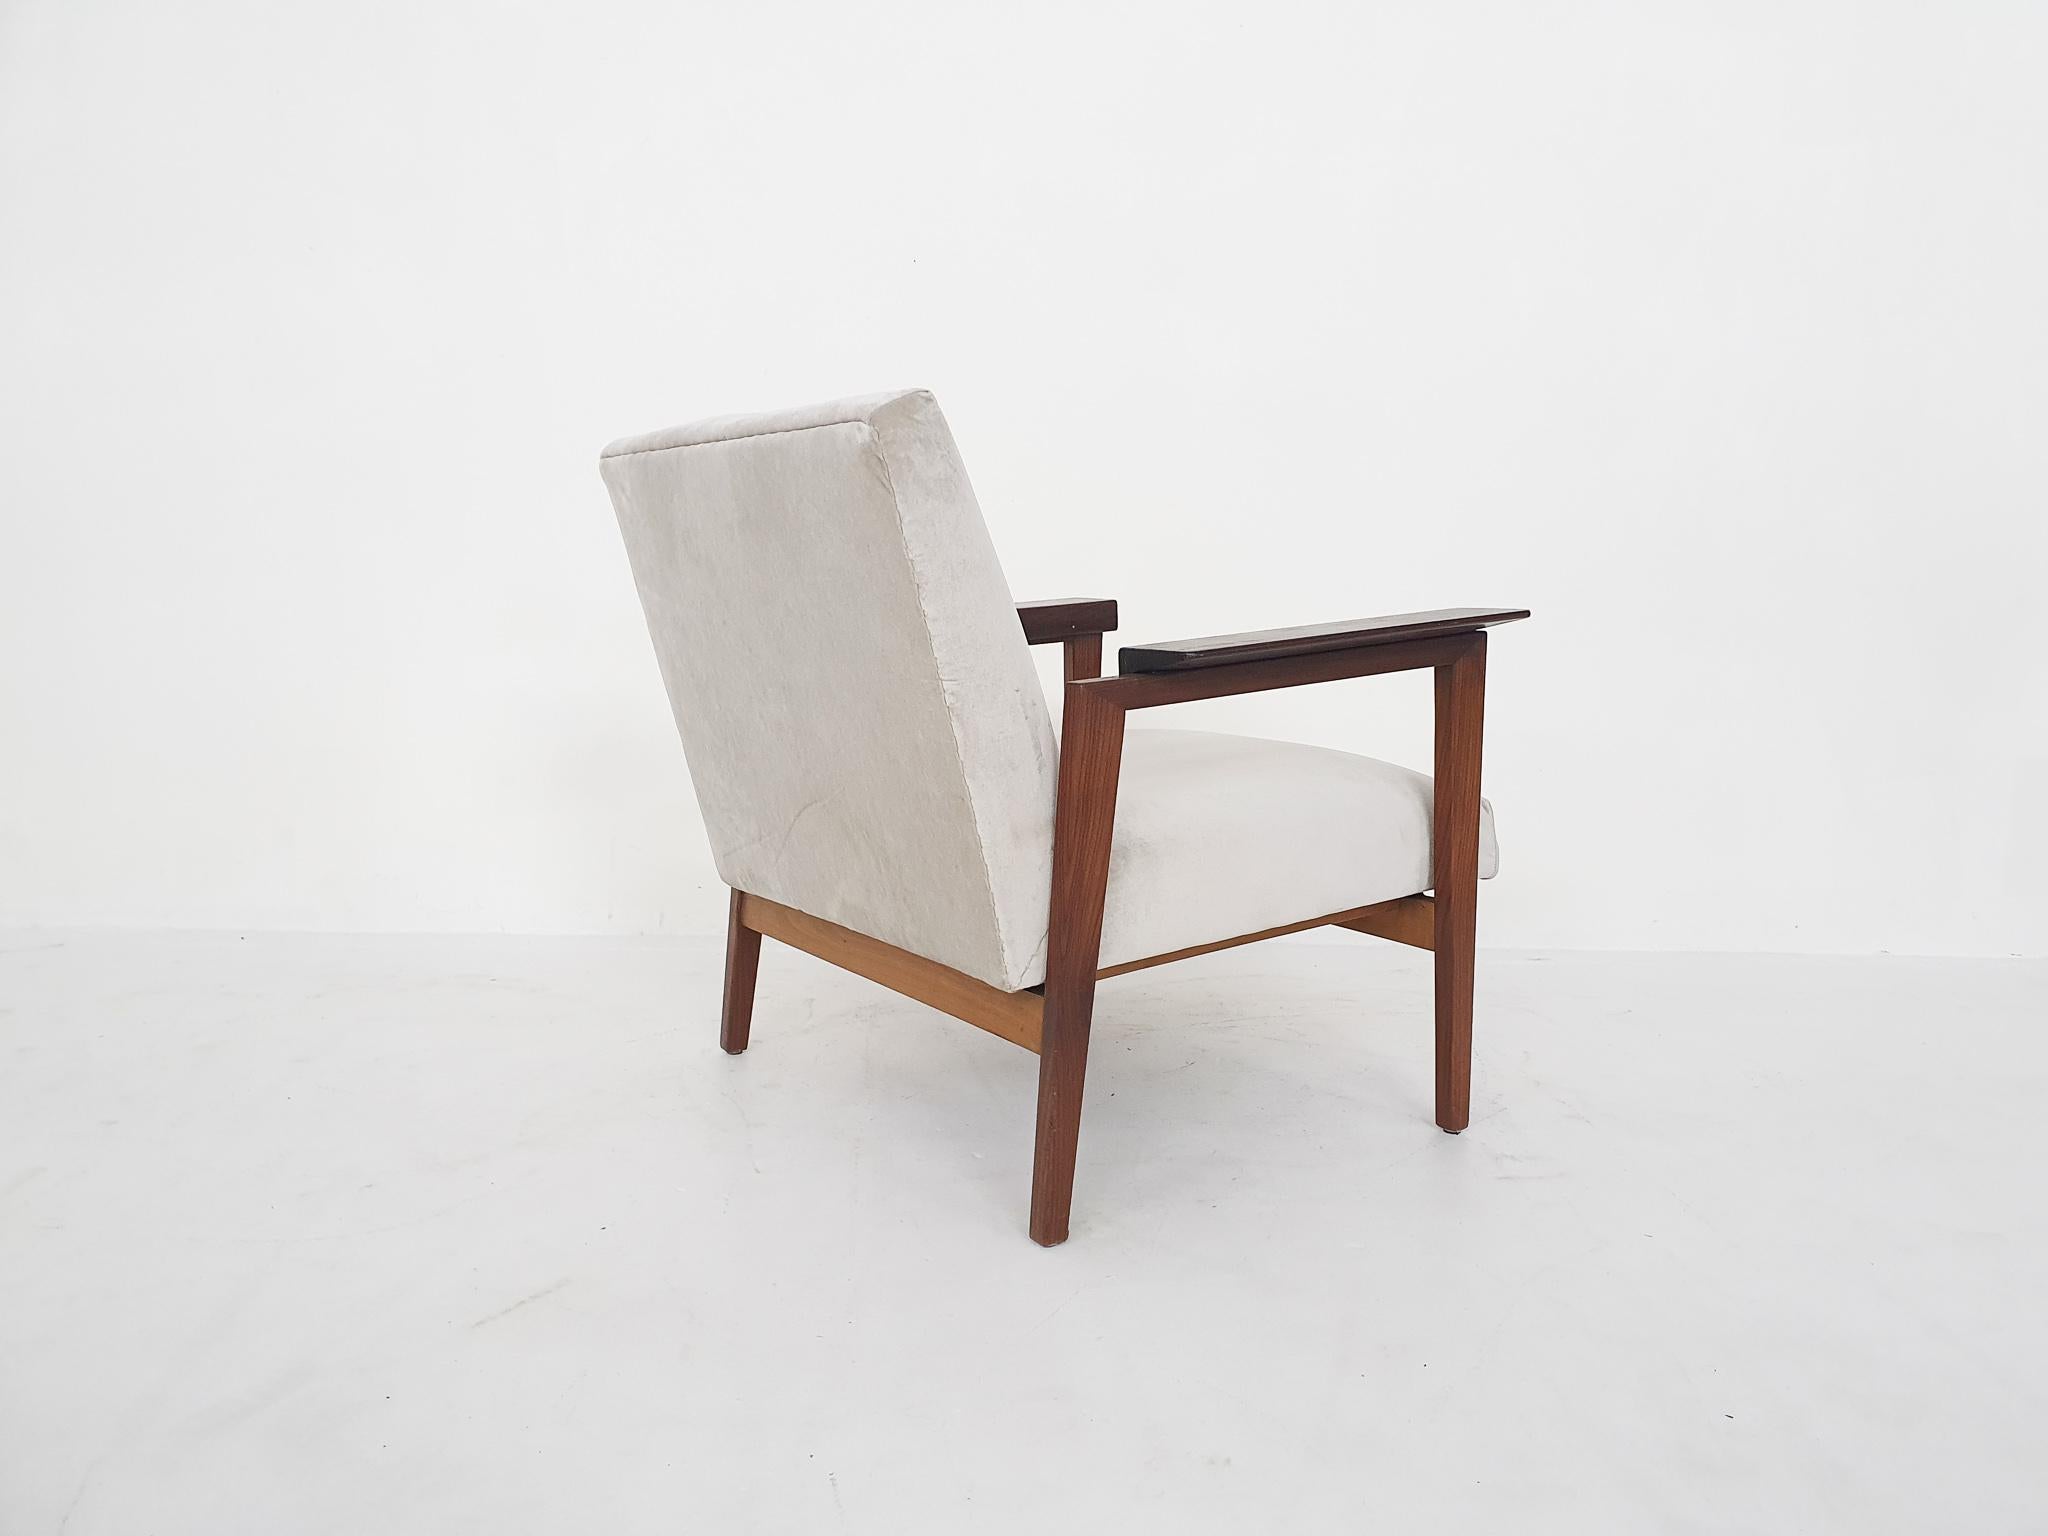 Mid-20th Century Scandinavian Modern Teak Arm Chair with New Beige Upholstery, 1960's For Sale